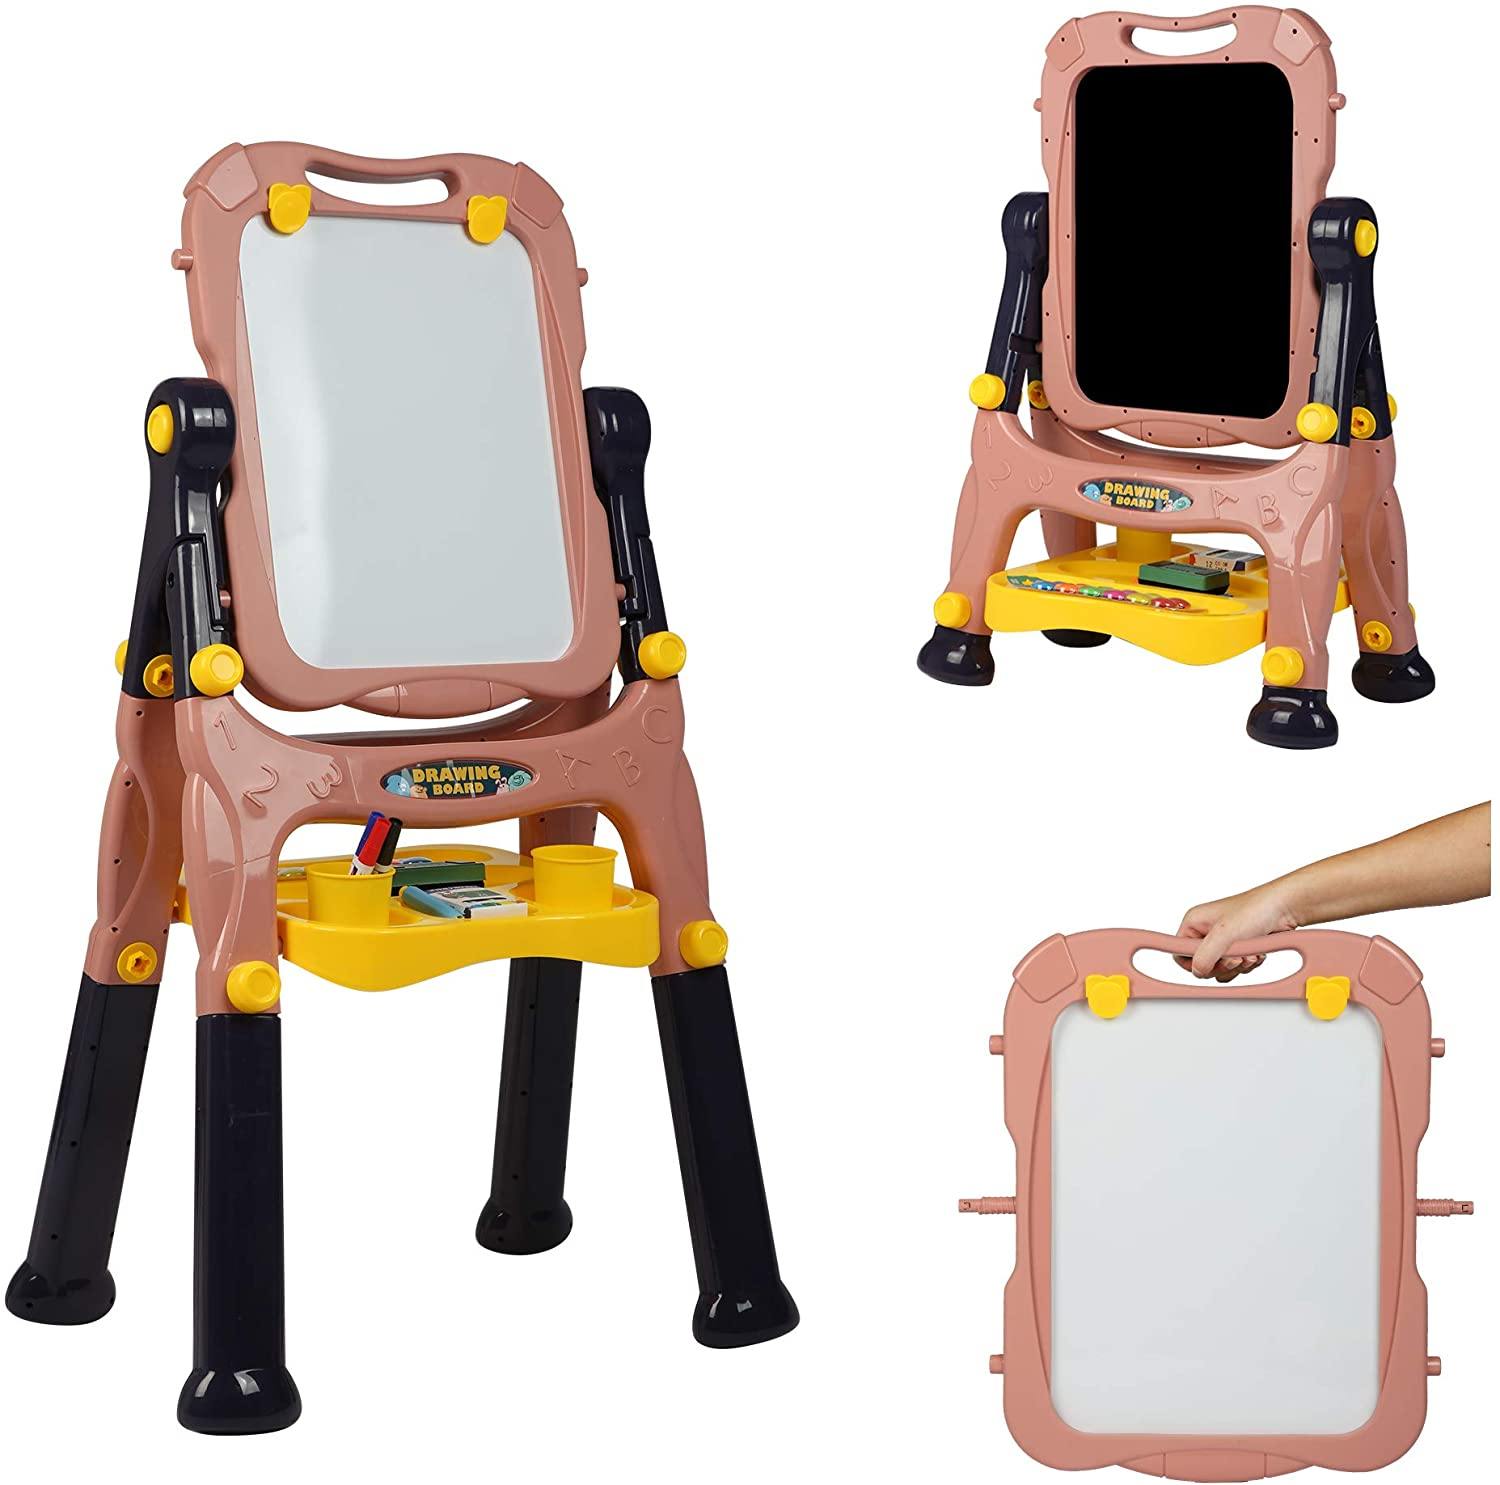 Kids Art Easel for Boys & Girls -Double Sided Standing Art Drawing Board- with Two Height Adjustable- Chalkboard and Magnetic Dry Erase Board, Pink - Bosonshop